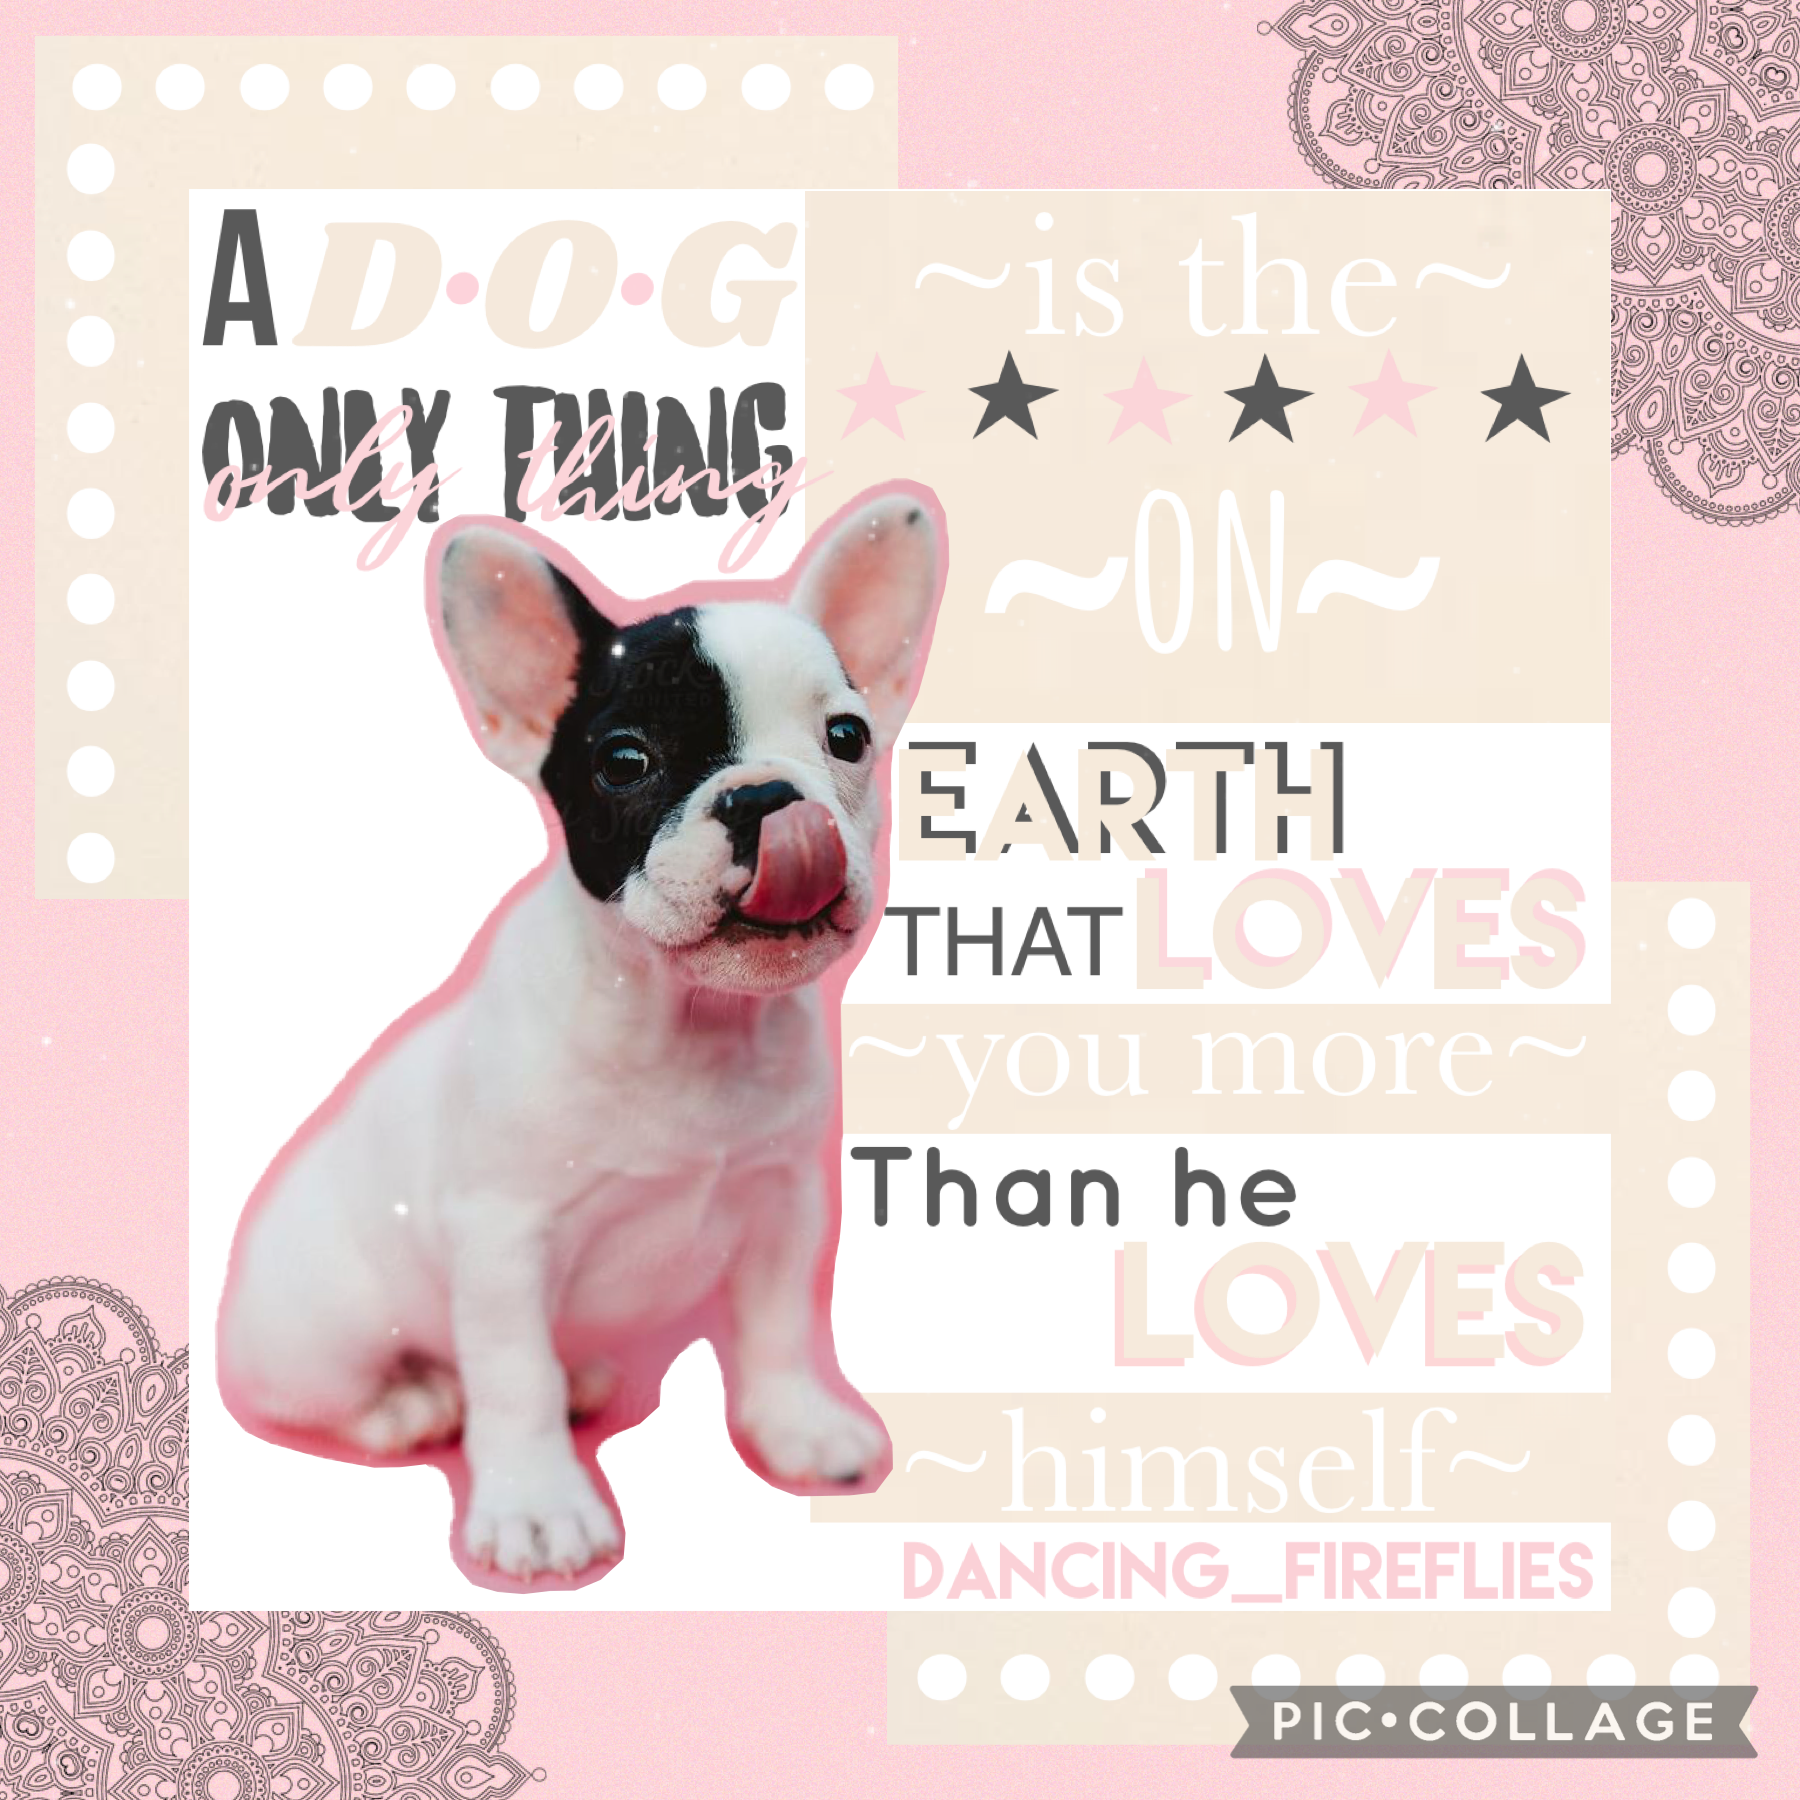 💖TAP💖
I love this quote so much and the little French is is so cute!🥰 from 1/10 how much do you rate the text? I personally don’t like this style text but I want to know what you all think!💞(5/19/21)